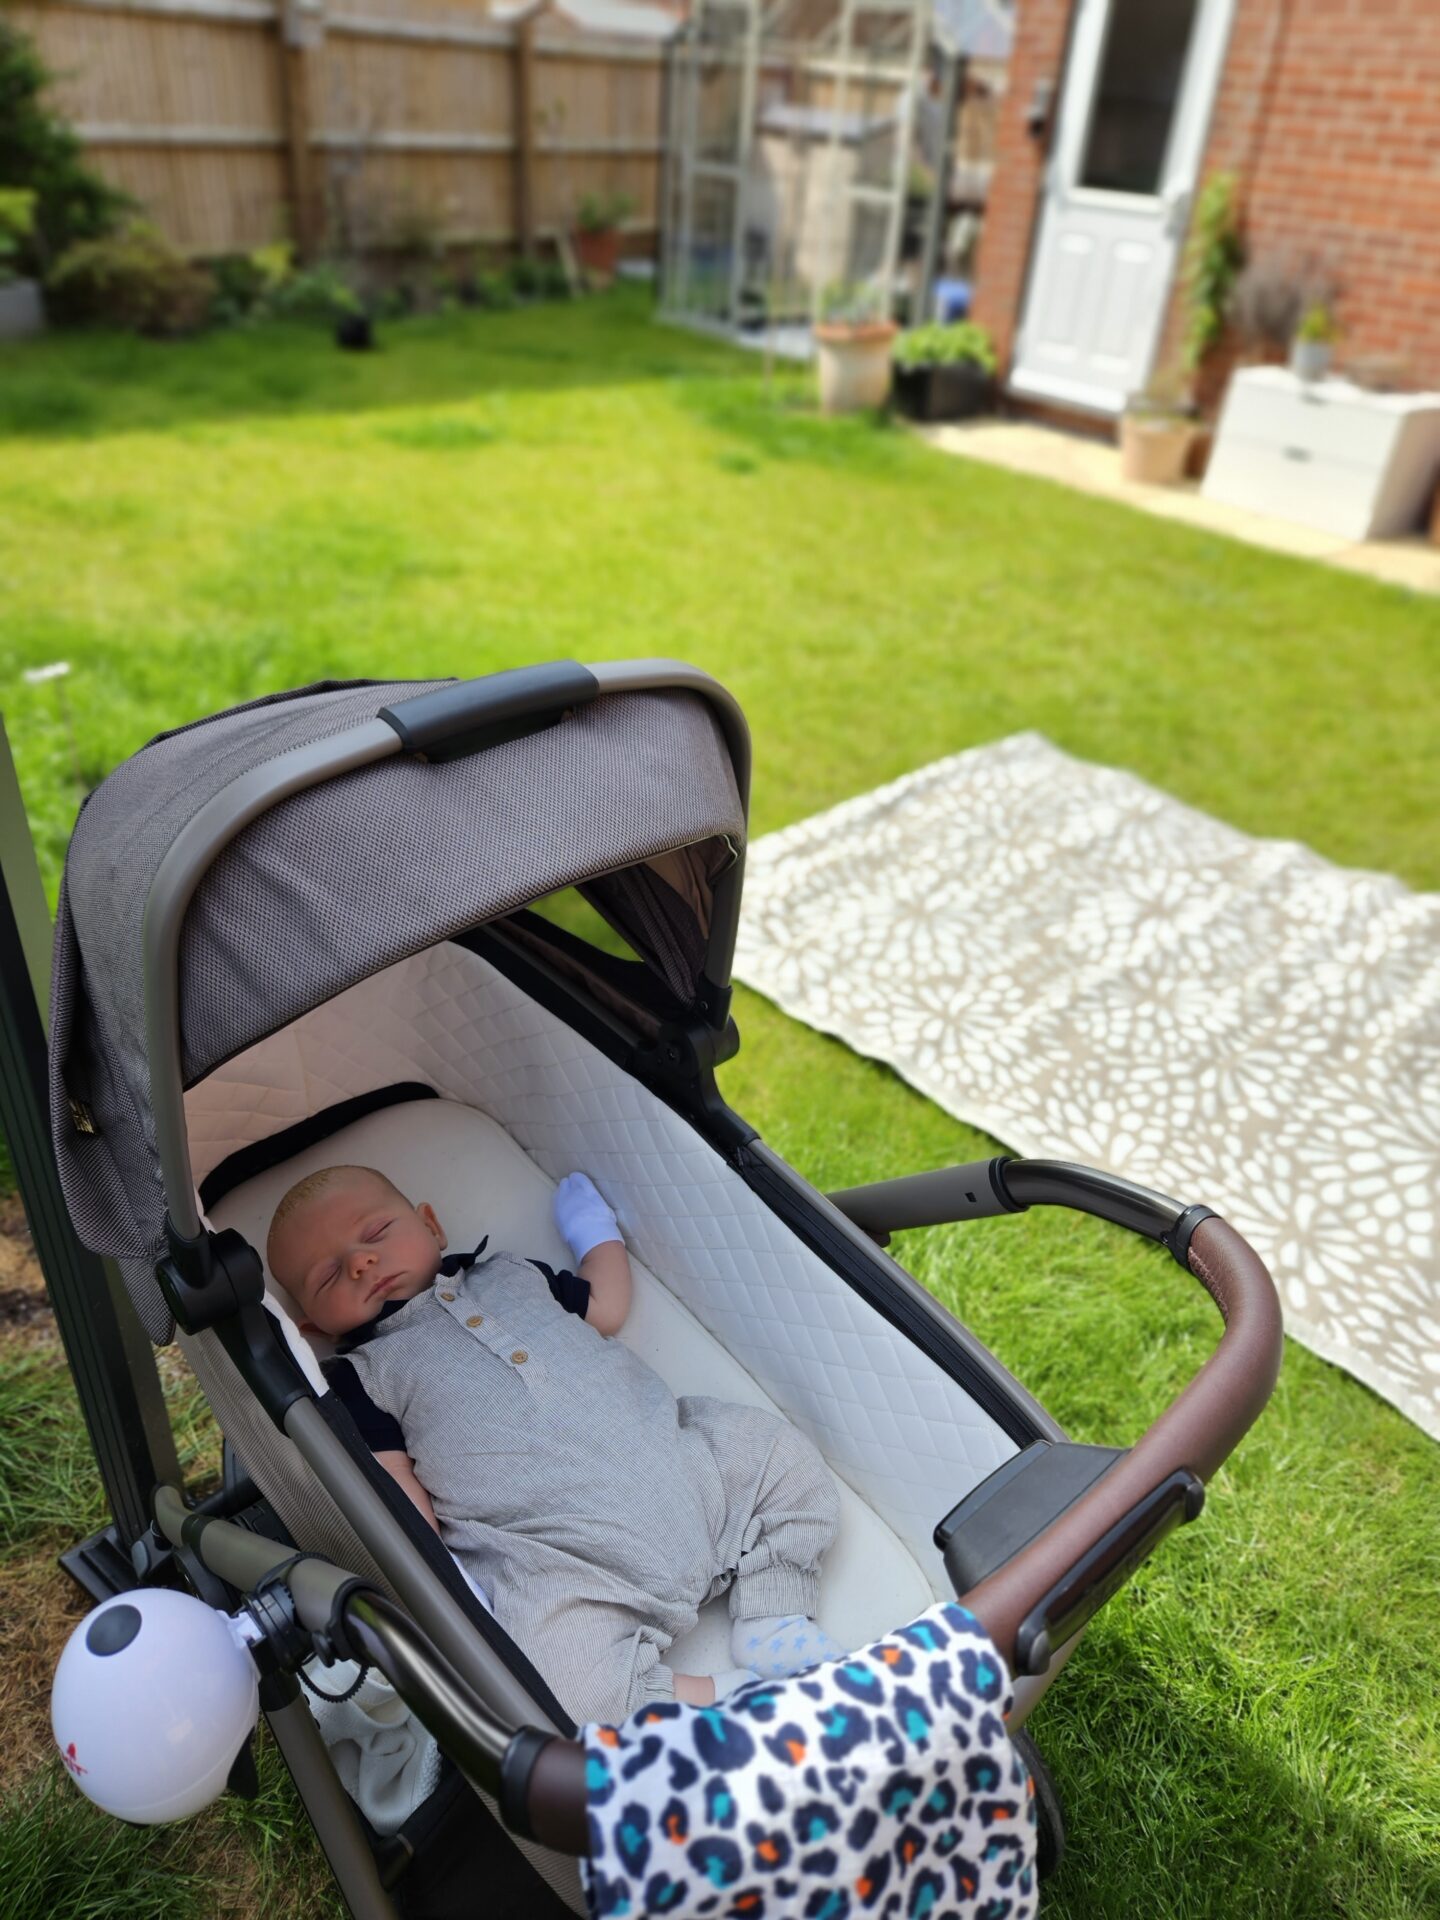 baby sleeping in a pram in a garden with green grass in the background 